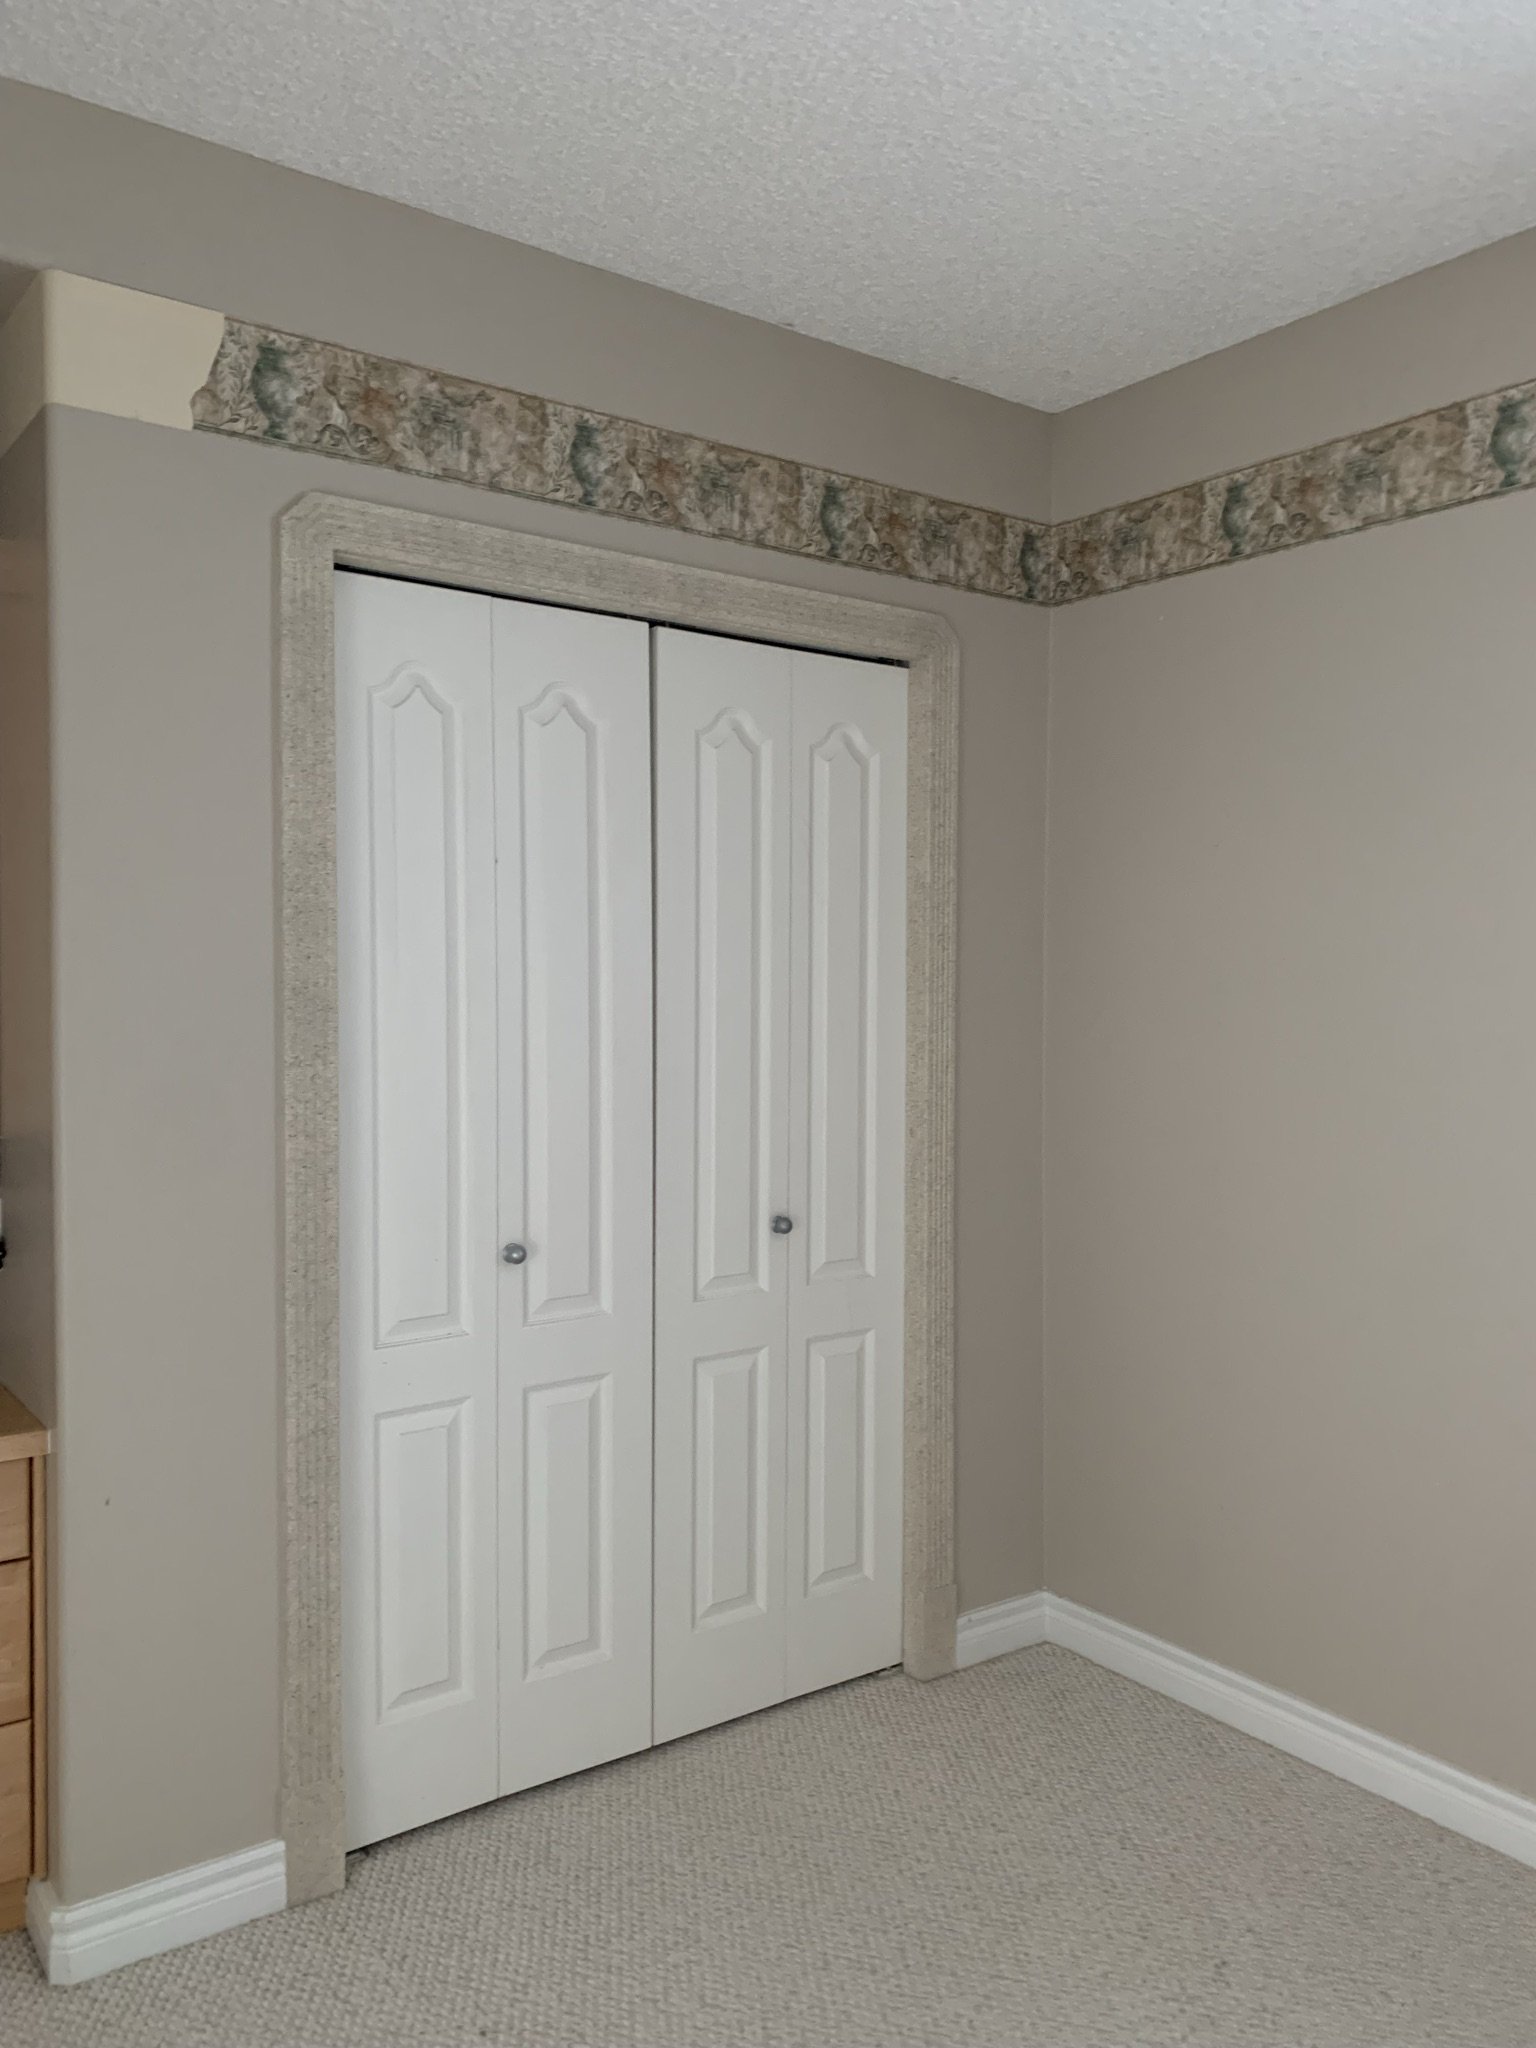 bifold closet doors with partially removed wallpaper border above